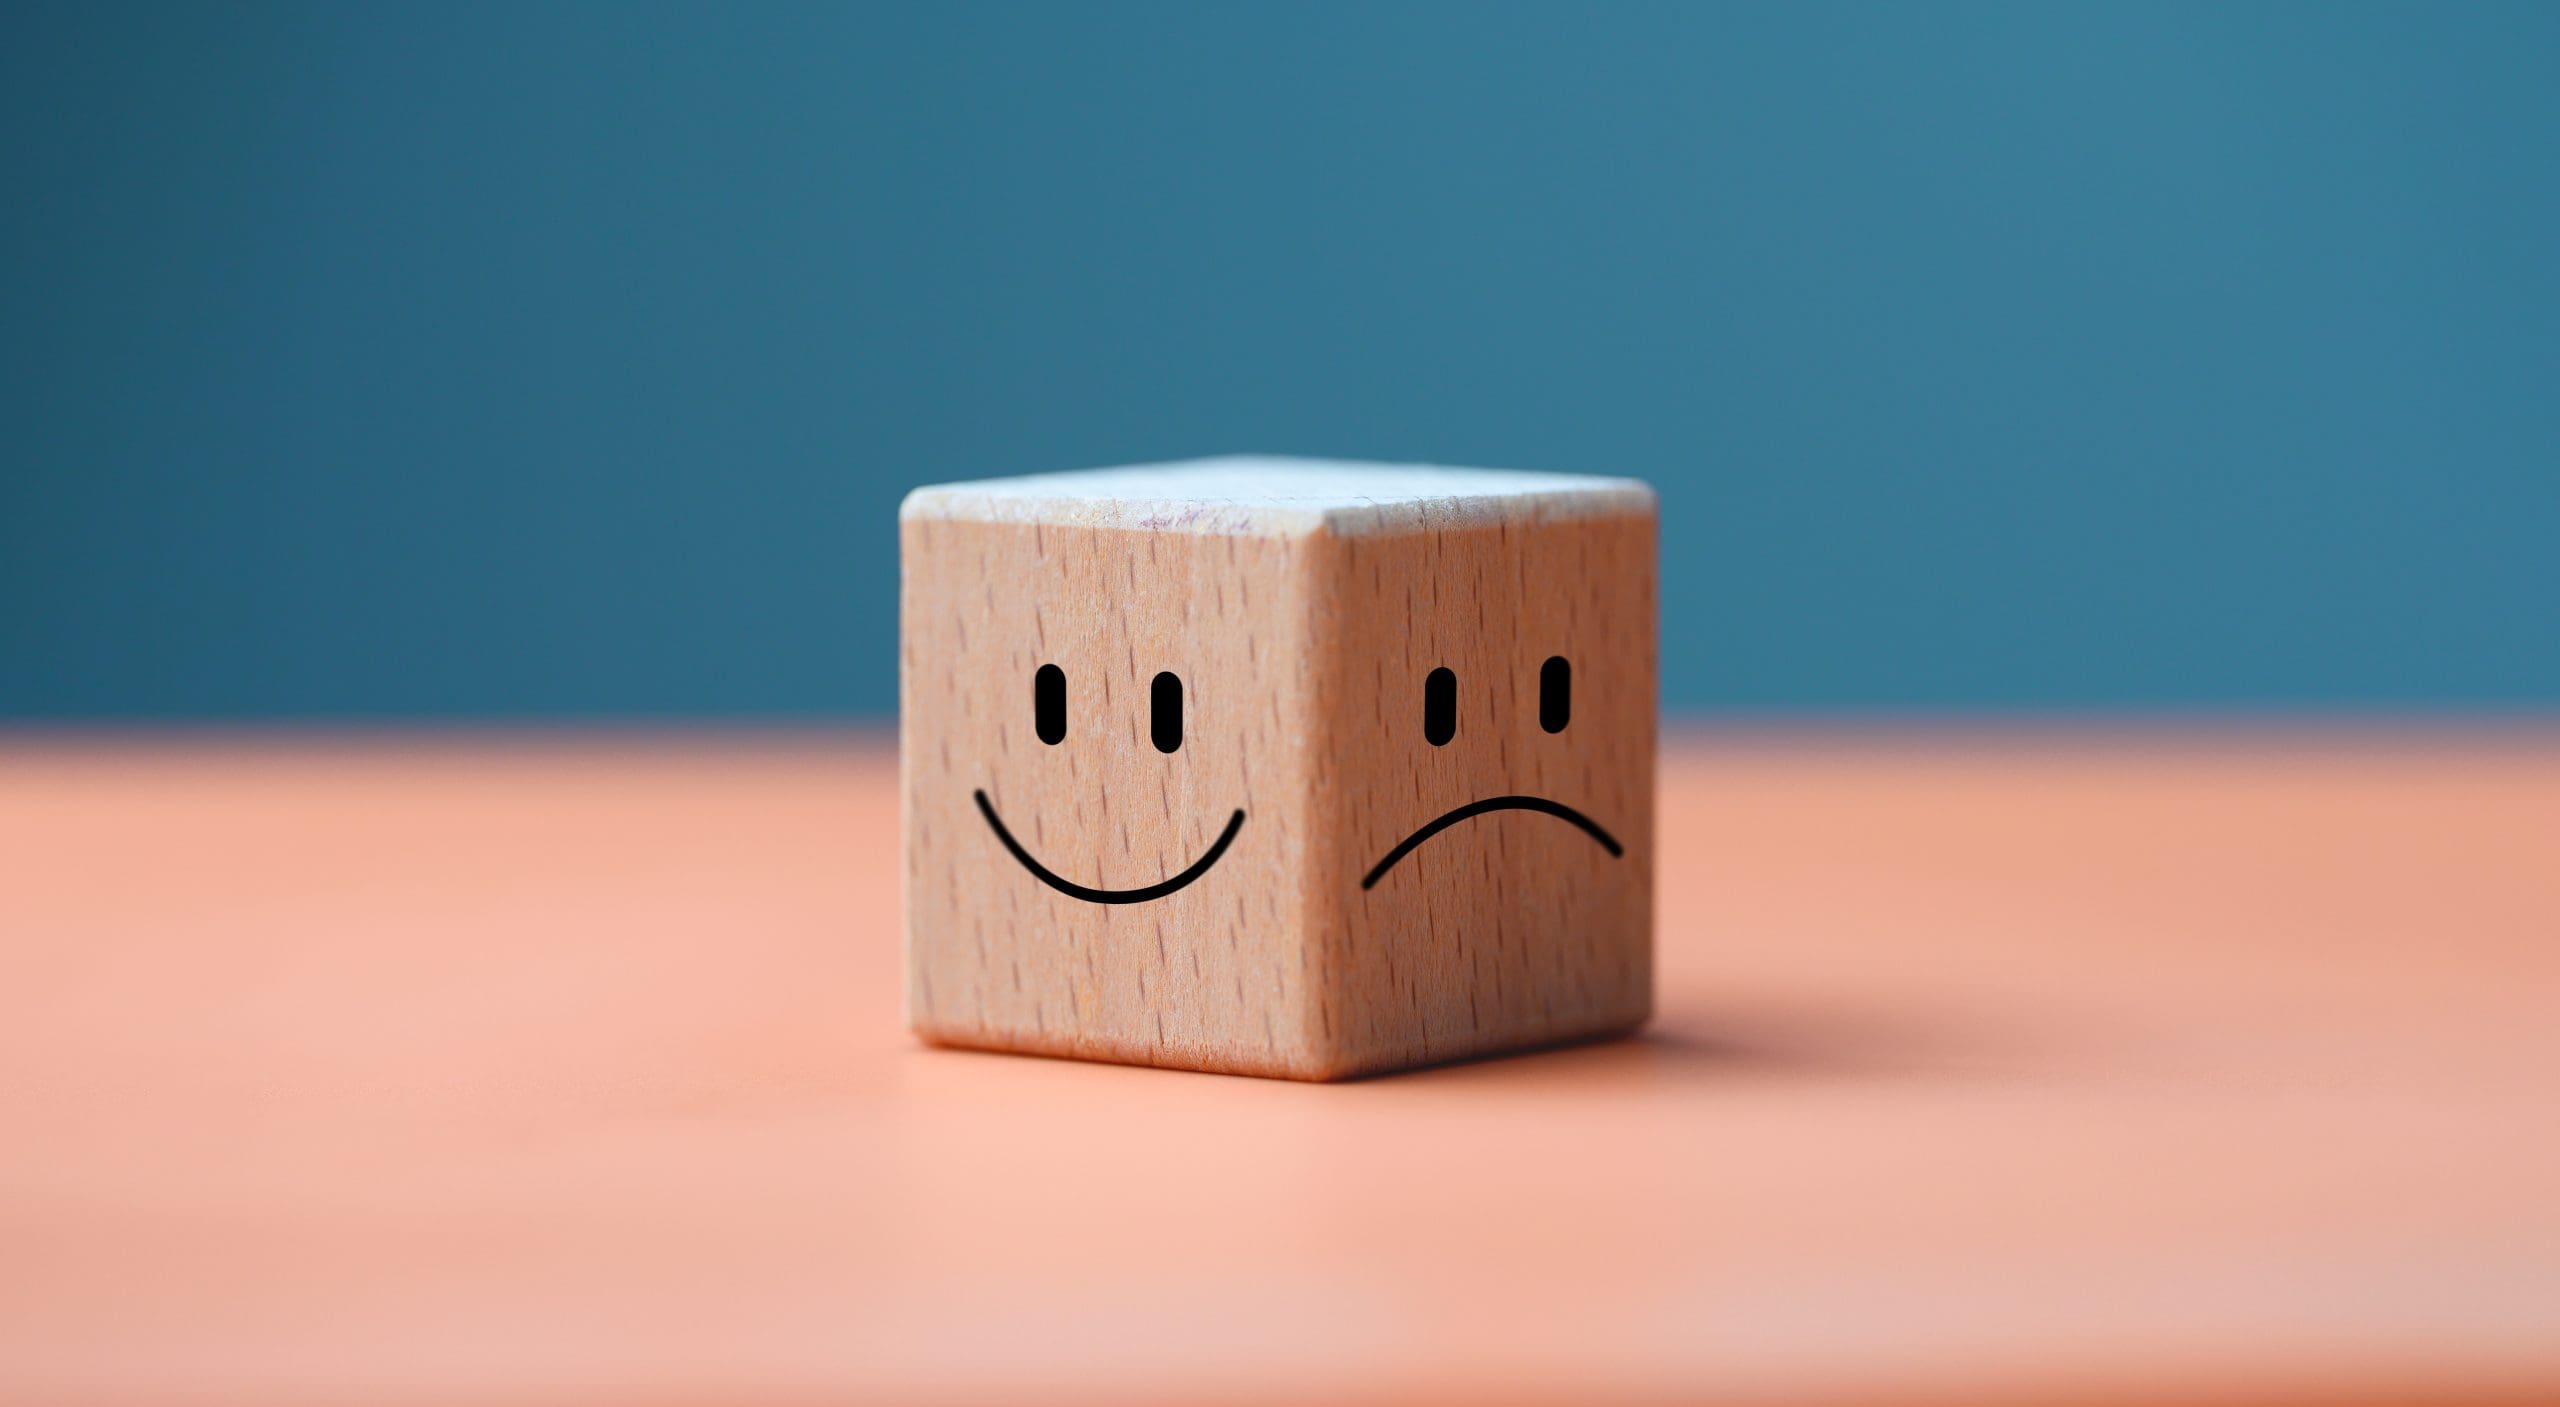 A wooden cube with a smiley face on it.